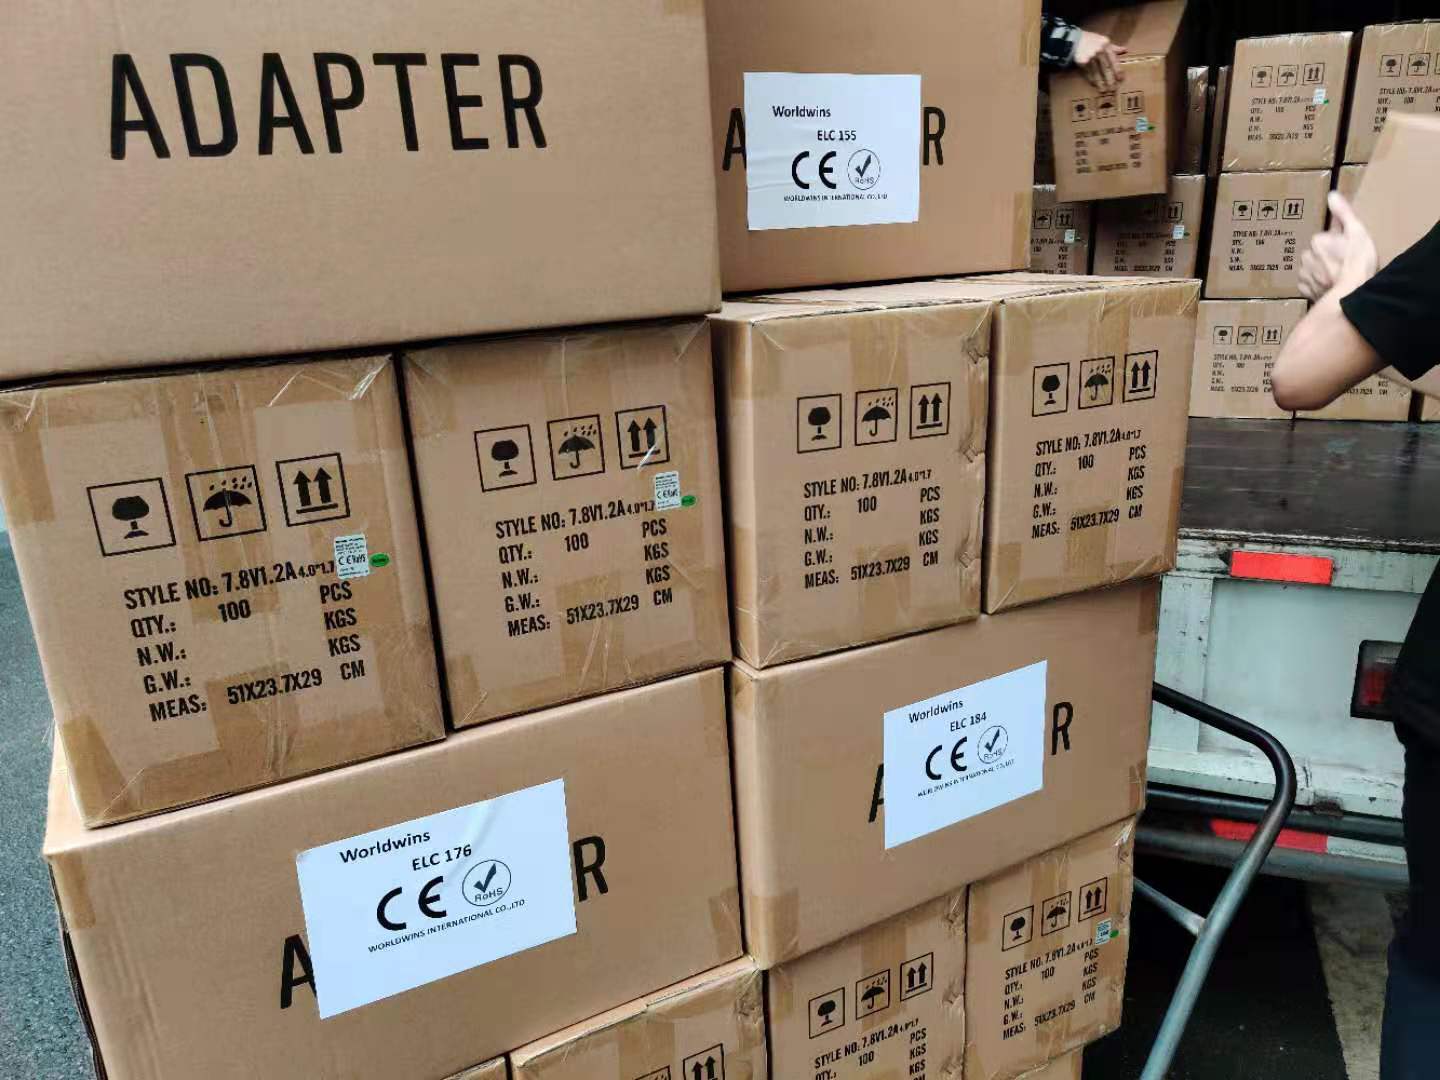 Super Dragon Power Supplies Were Shipped to Istanbul